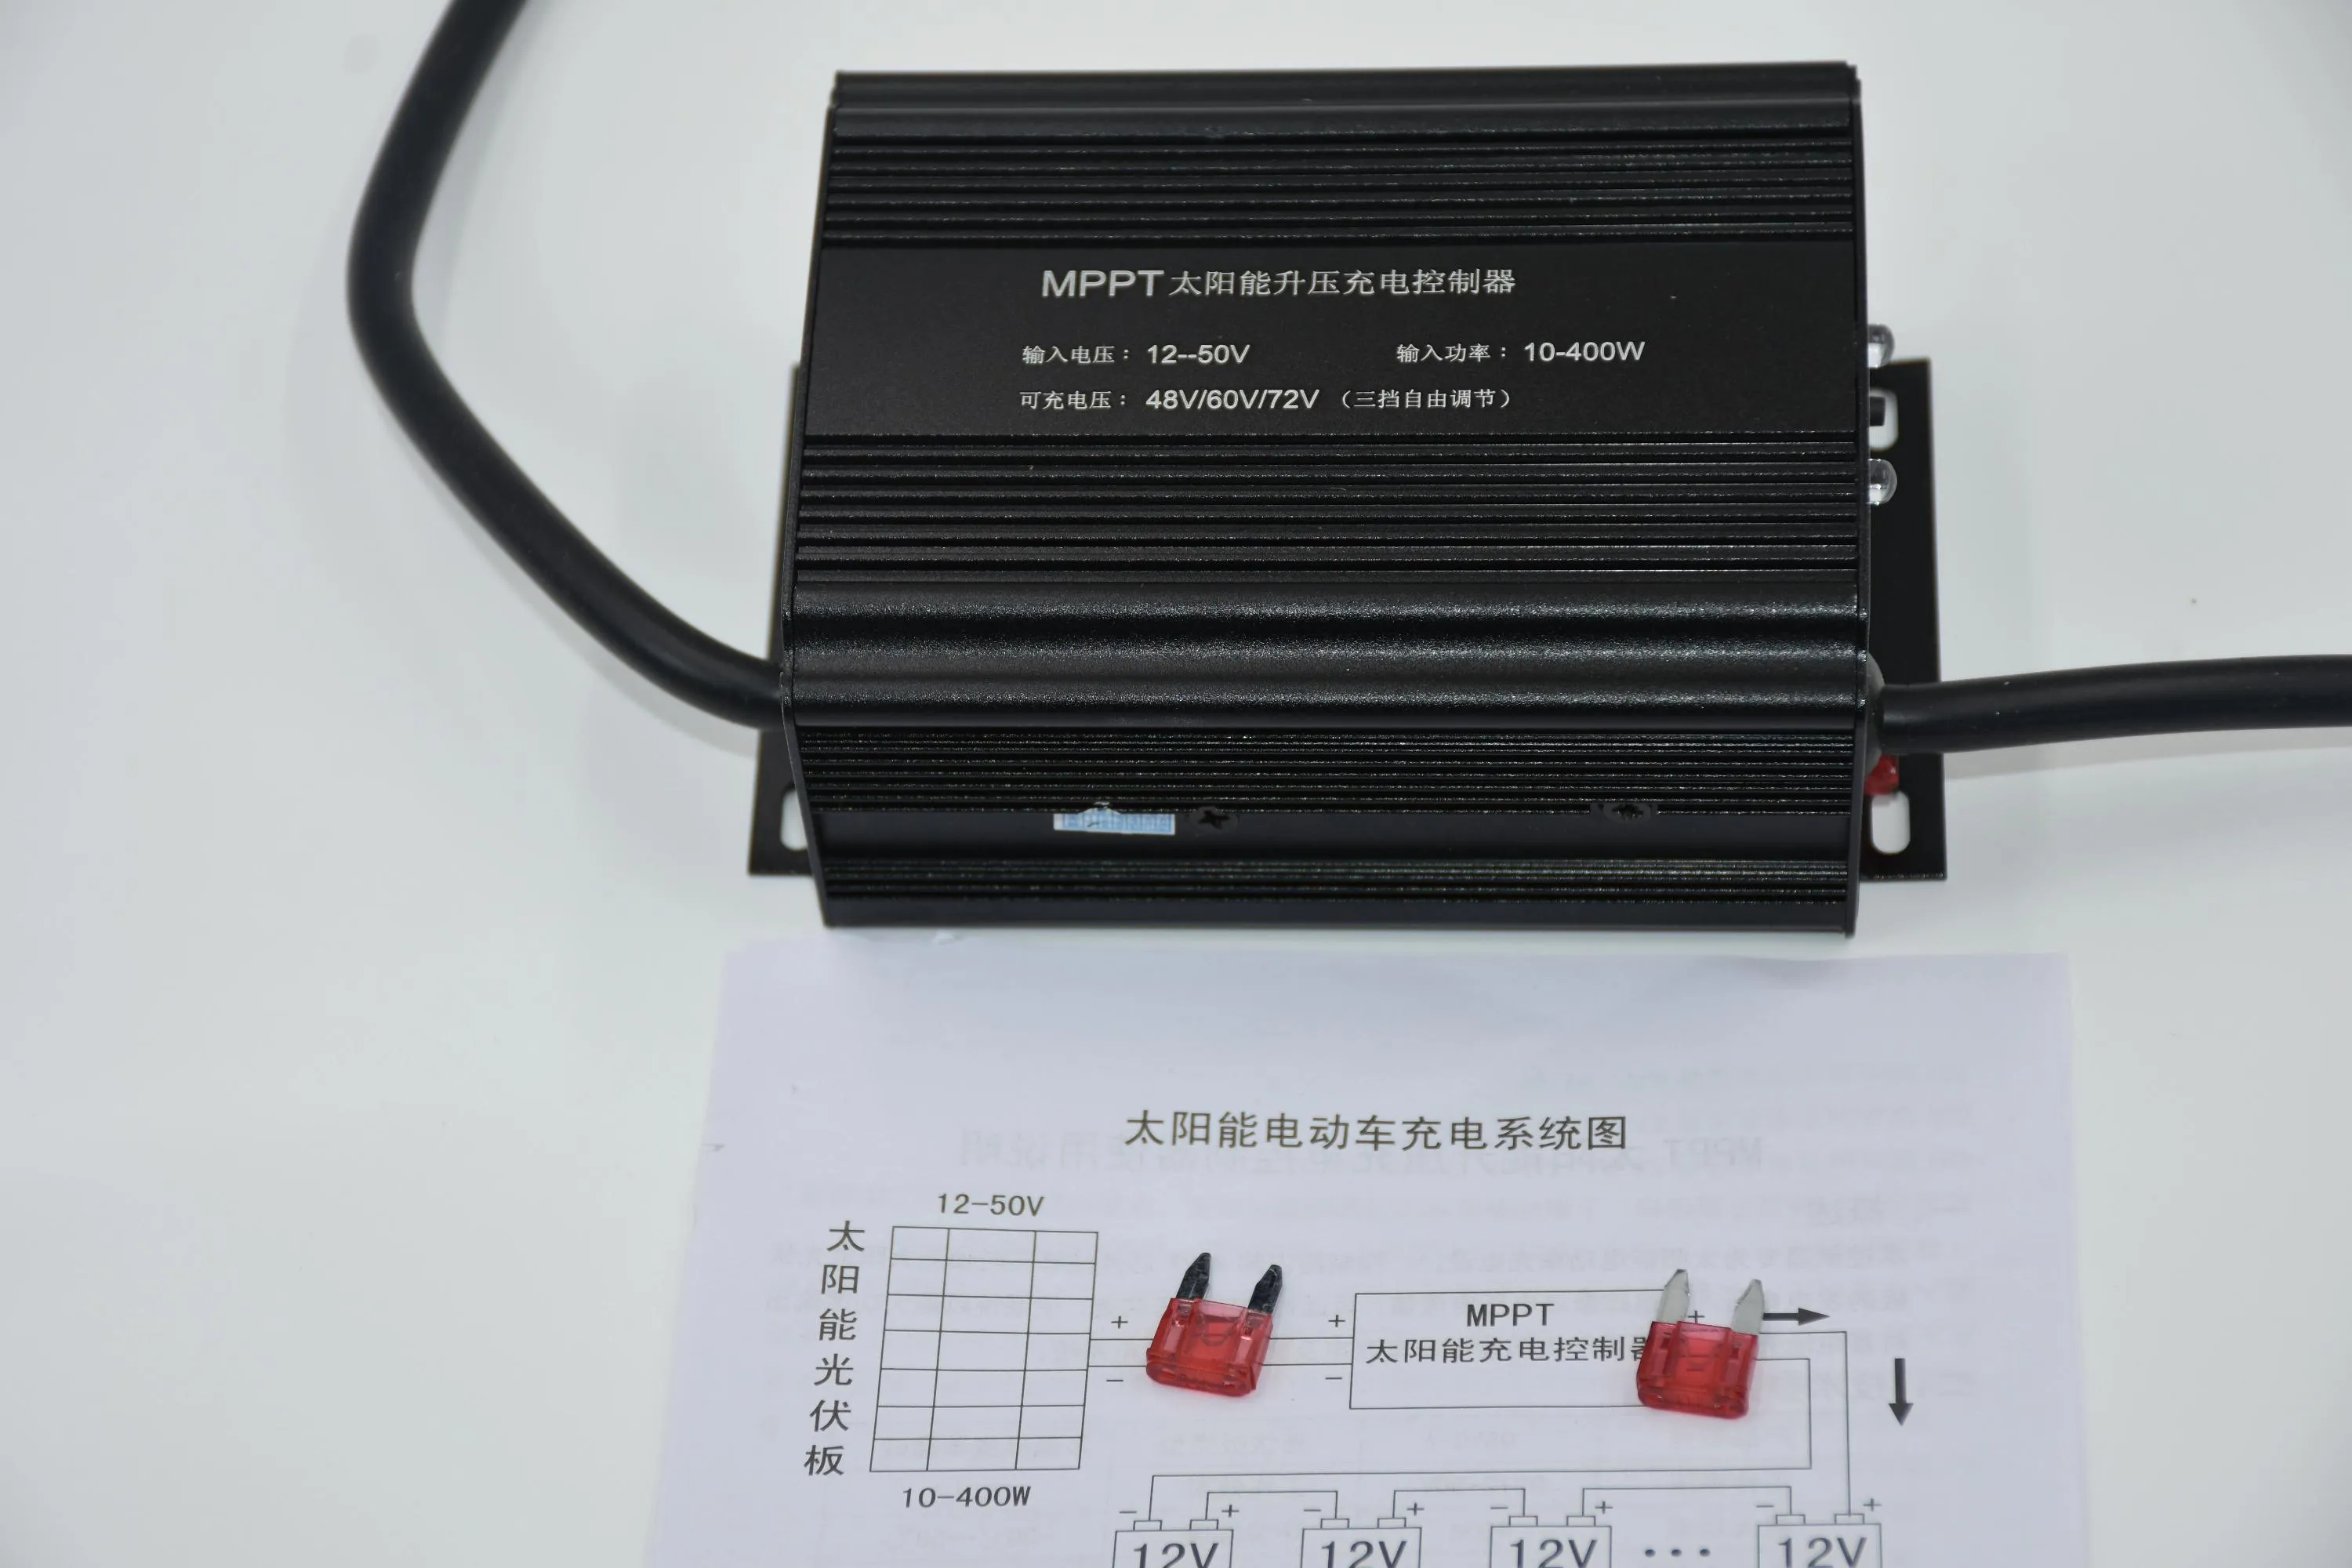 Solar Charge Controller 10~400W, DC12 50V Boost To 48V/60V/72V, Amper/Voltage  Dual Display, For Electrical Bicycle, Tricycle From Energygreen, $34.48